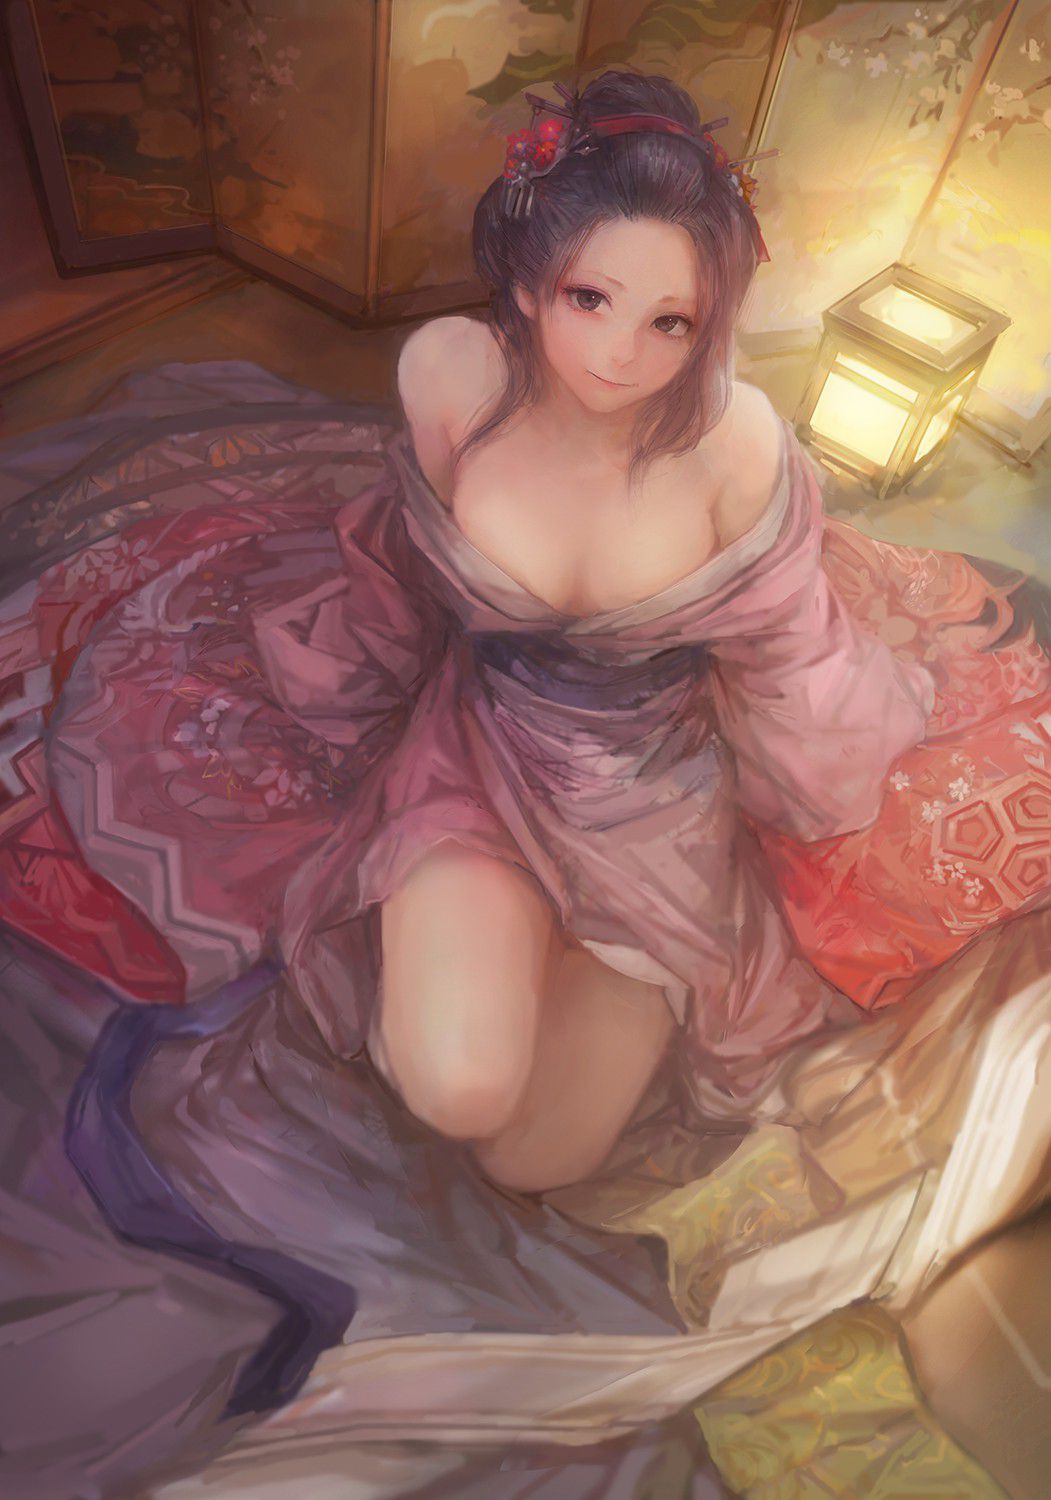 【2nd】Erotic image of a girl with beautiful thighs Part 64 25